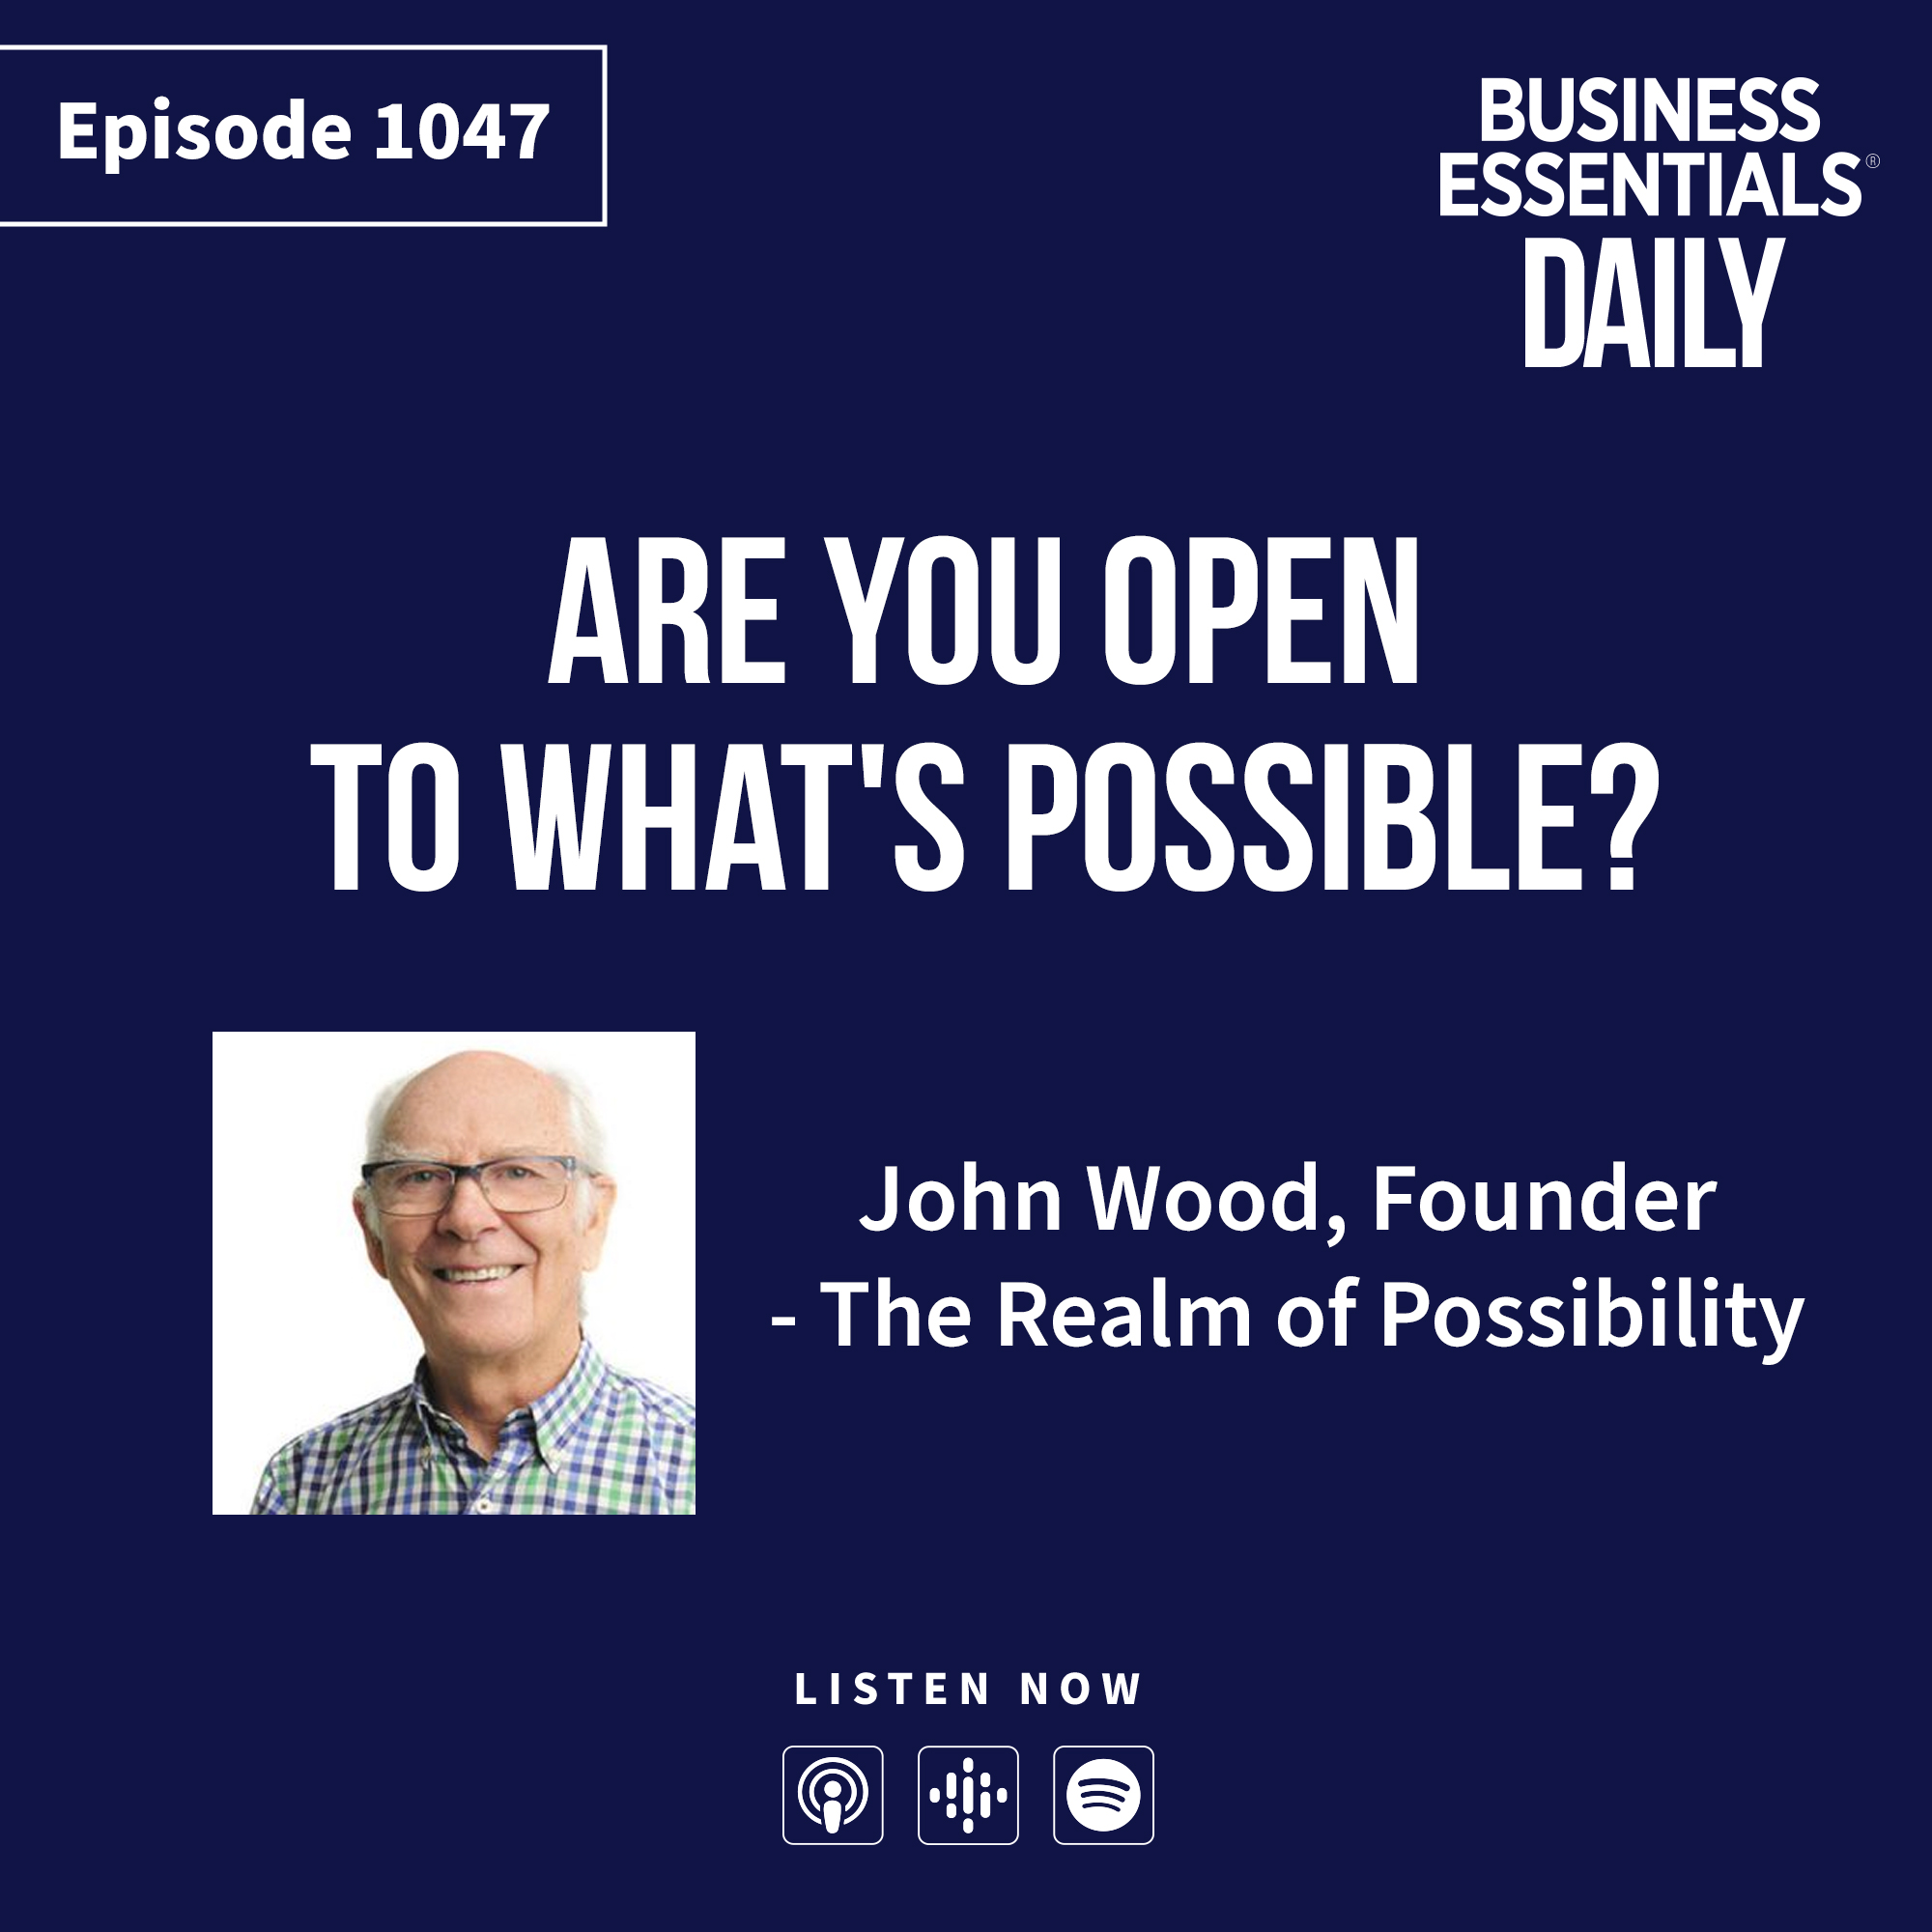 Are you open to what's possible?